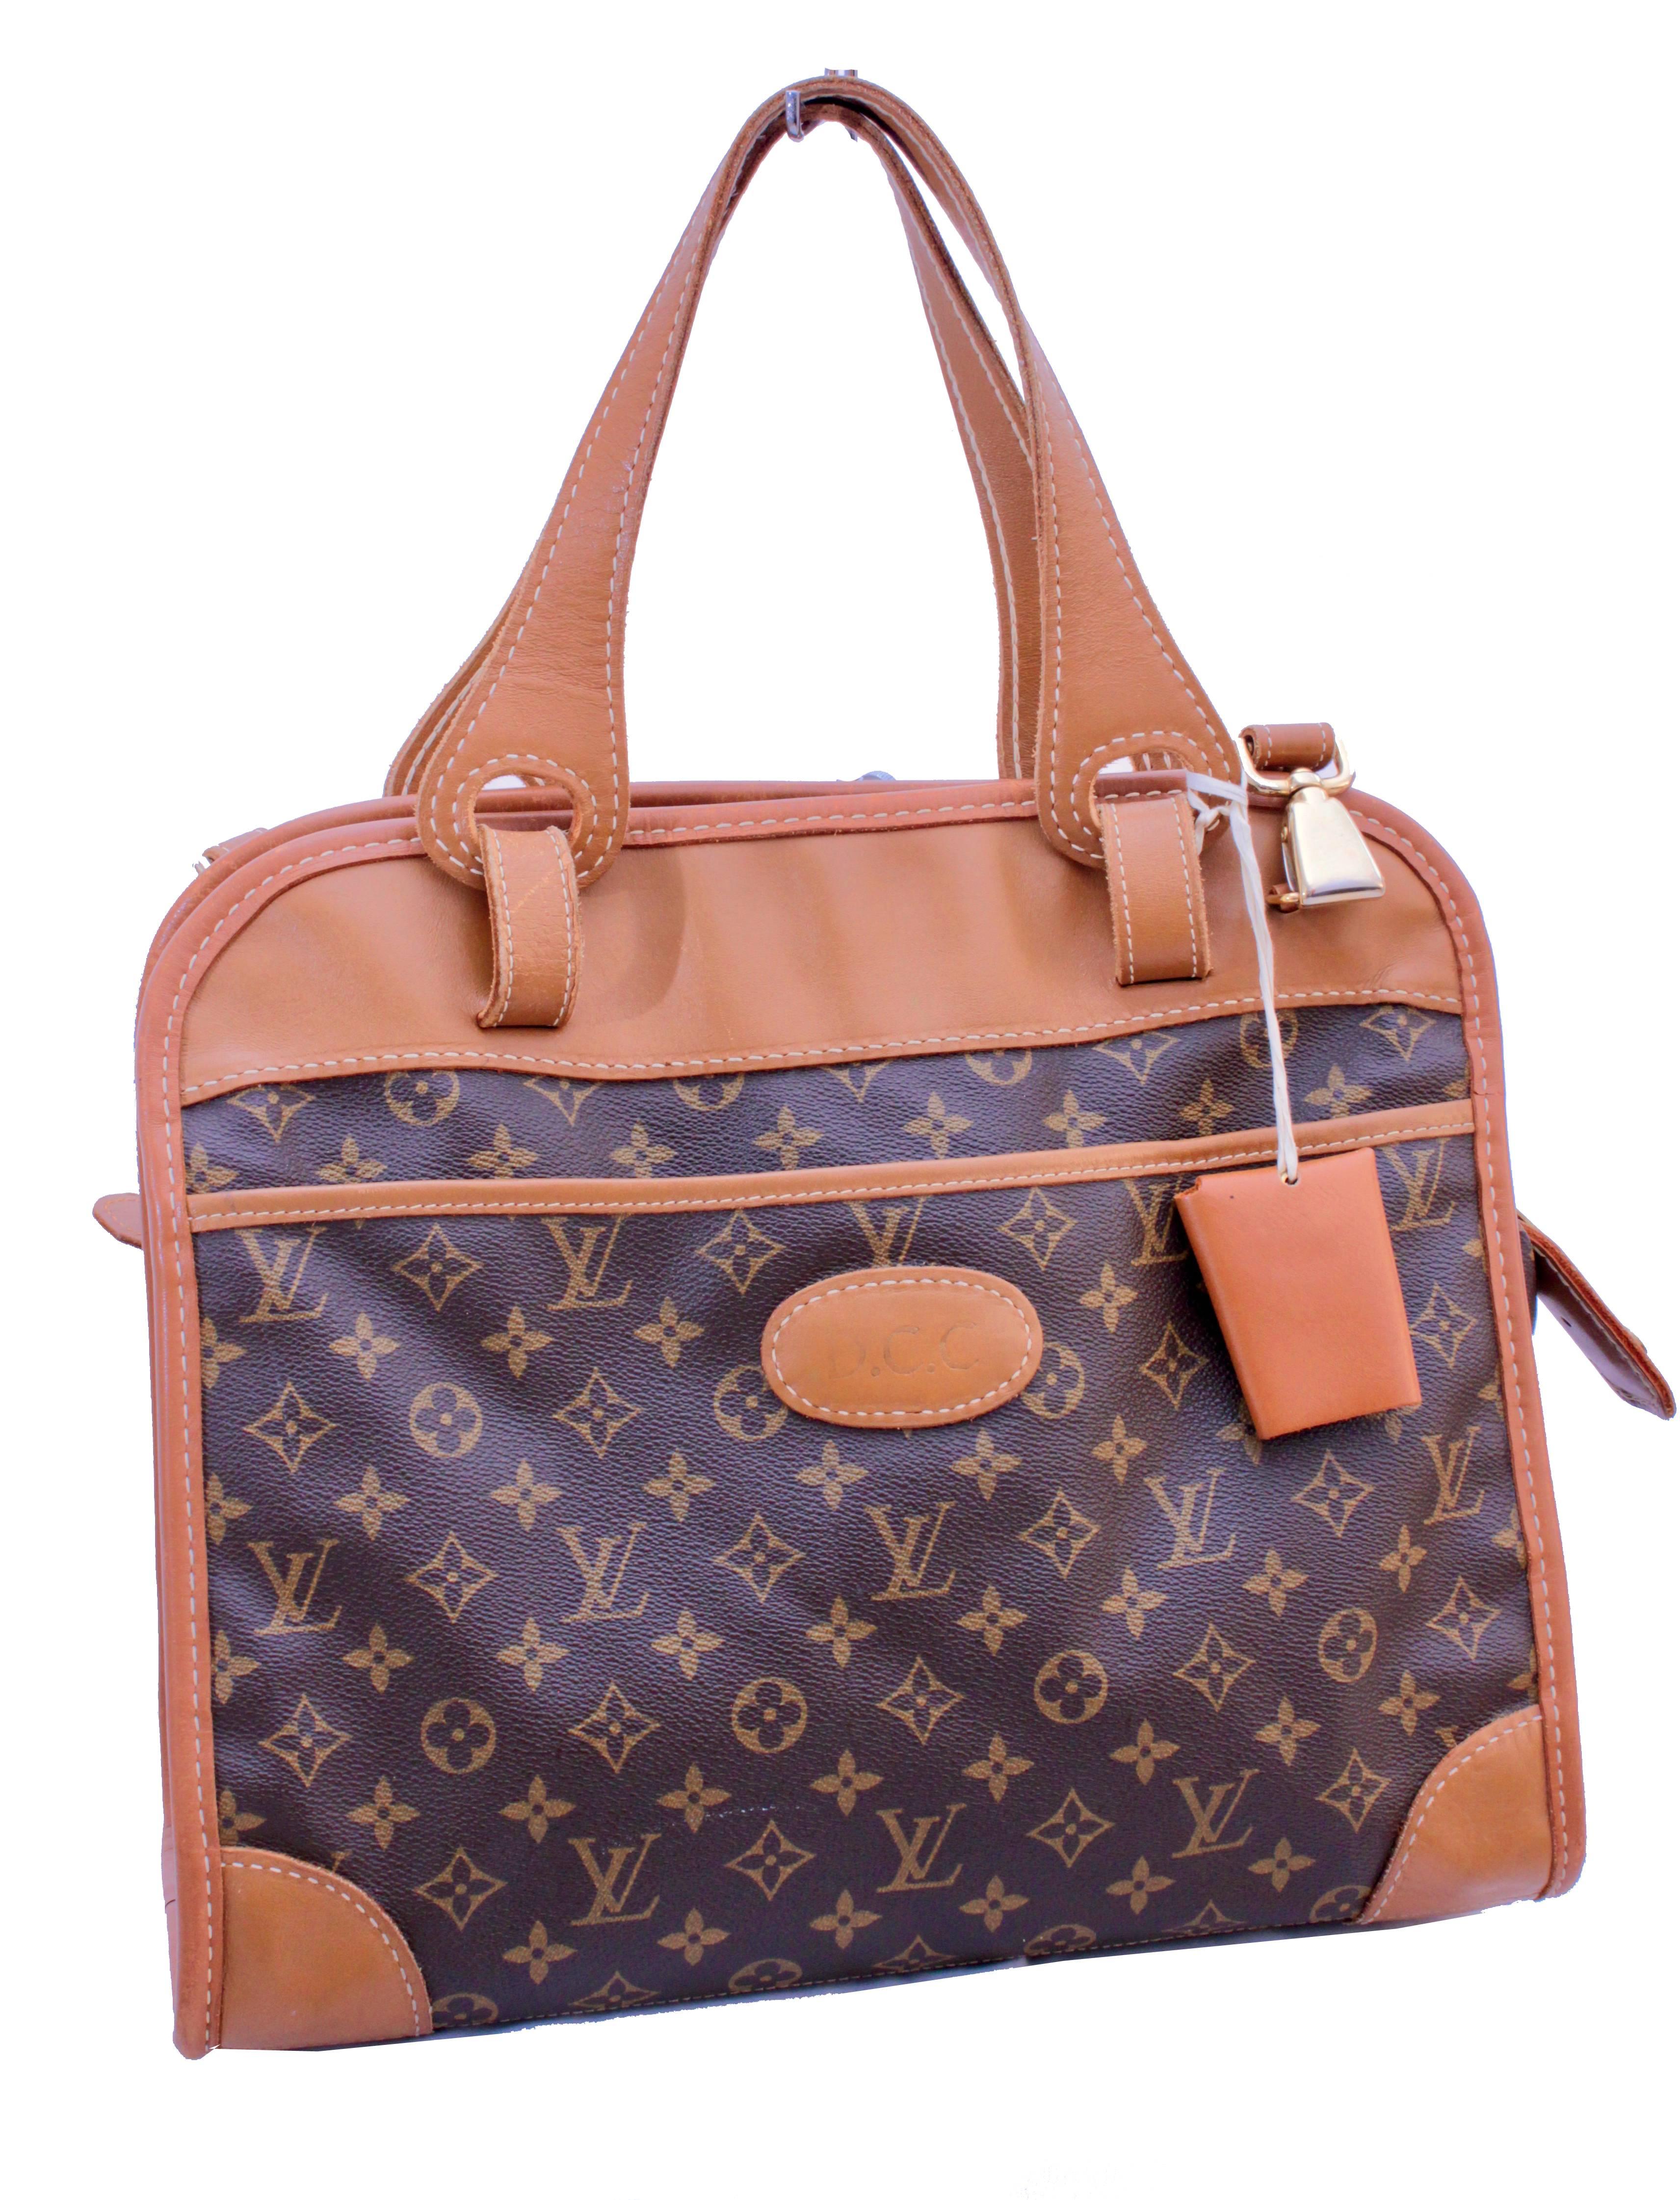 This incredibly rare carry on bag was made by The French Company under special license by Louis Vuitton, most likely in the early 1980s.  Made from their signature monogram canvas, it features double handles, a removable and adjustable shoulder